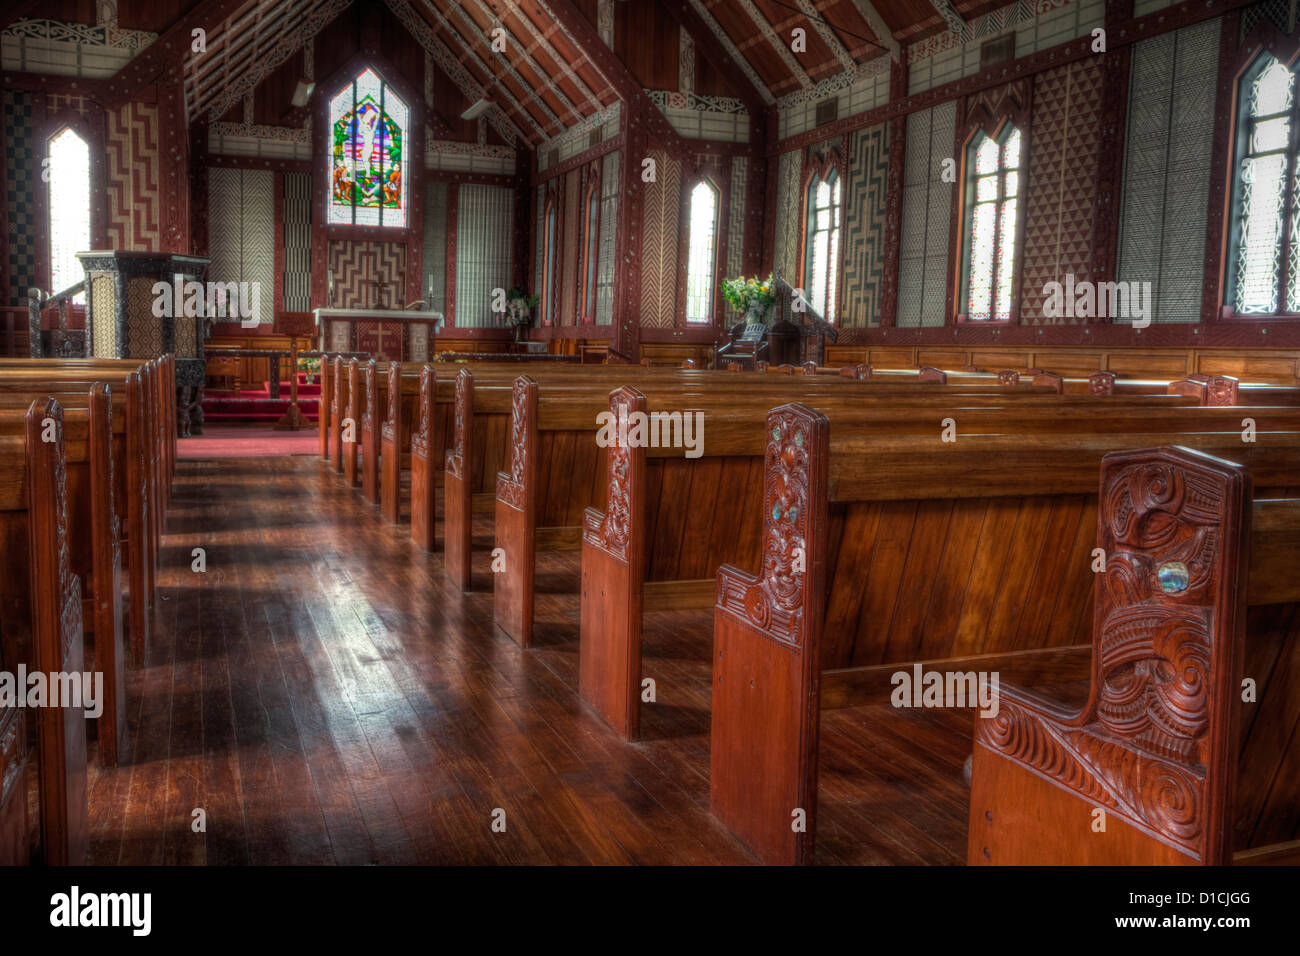 Cultural Syncretism. St. Mary's Anglican Church, Tikitiki, north island, New Zealand, incorporates Maori motifs in interior. Stock Photo